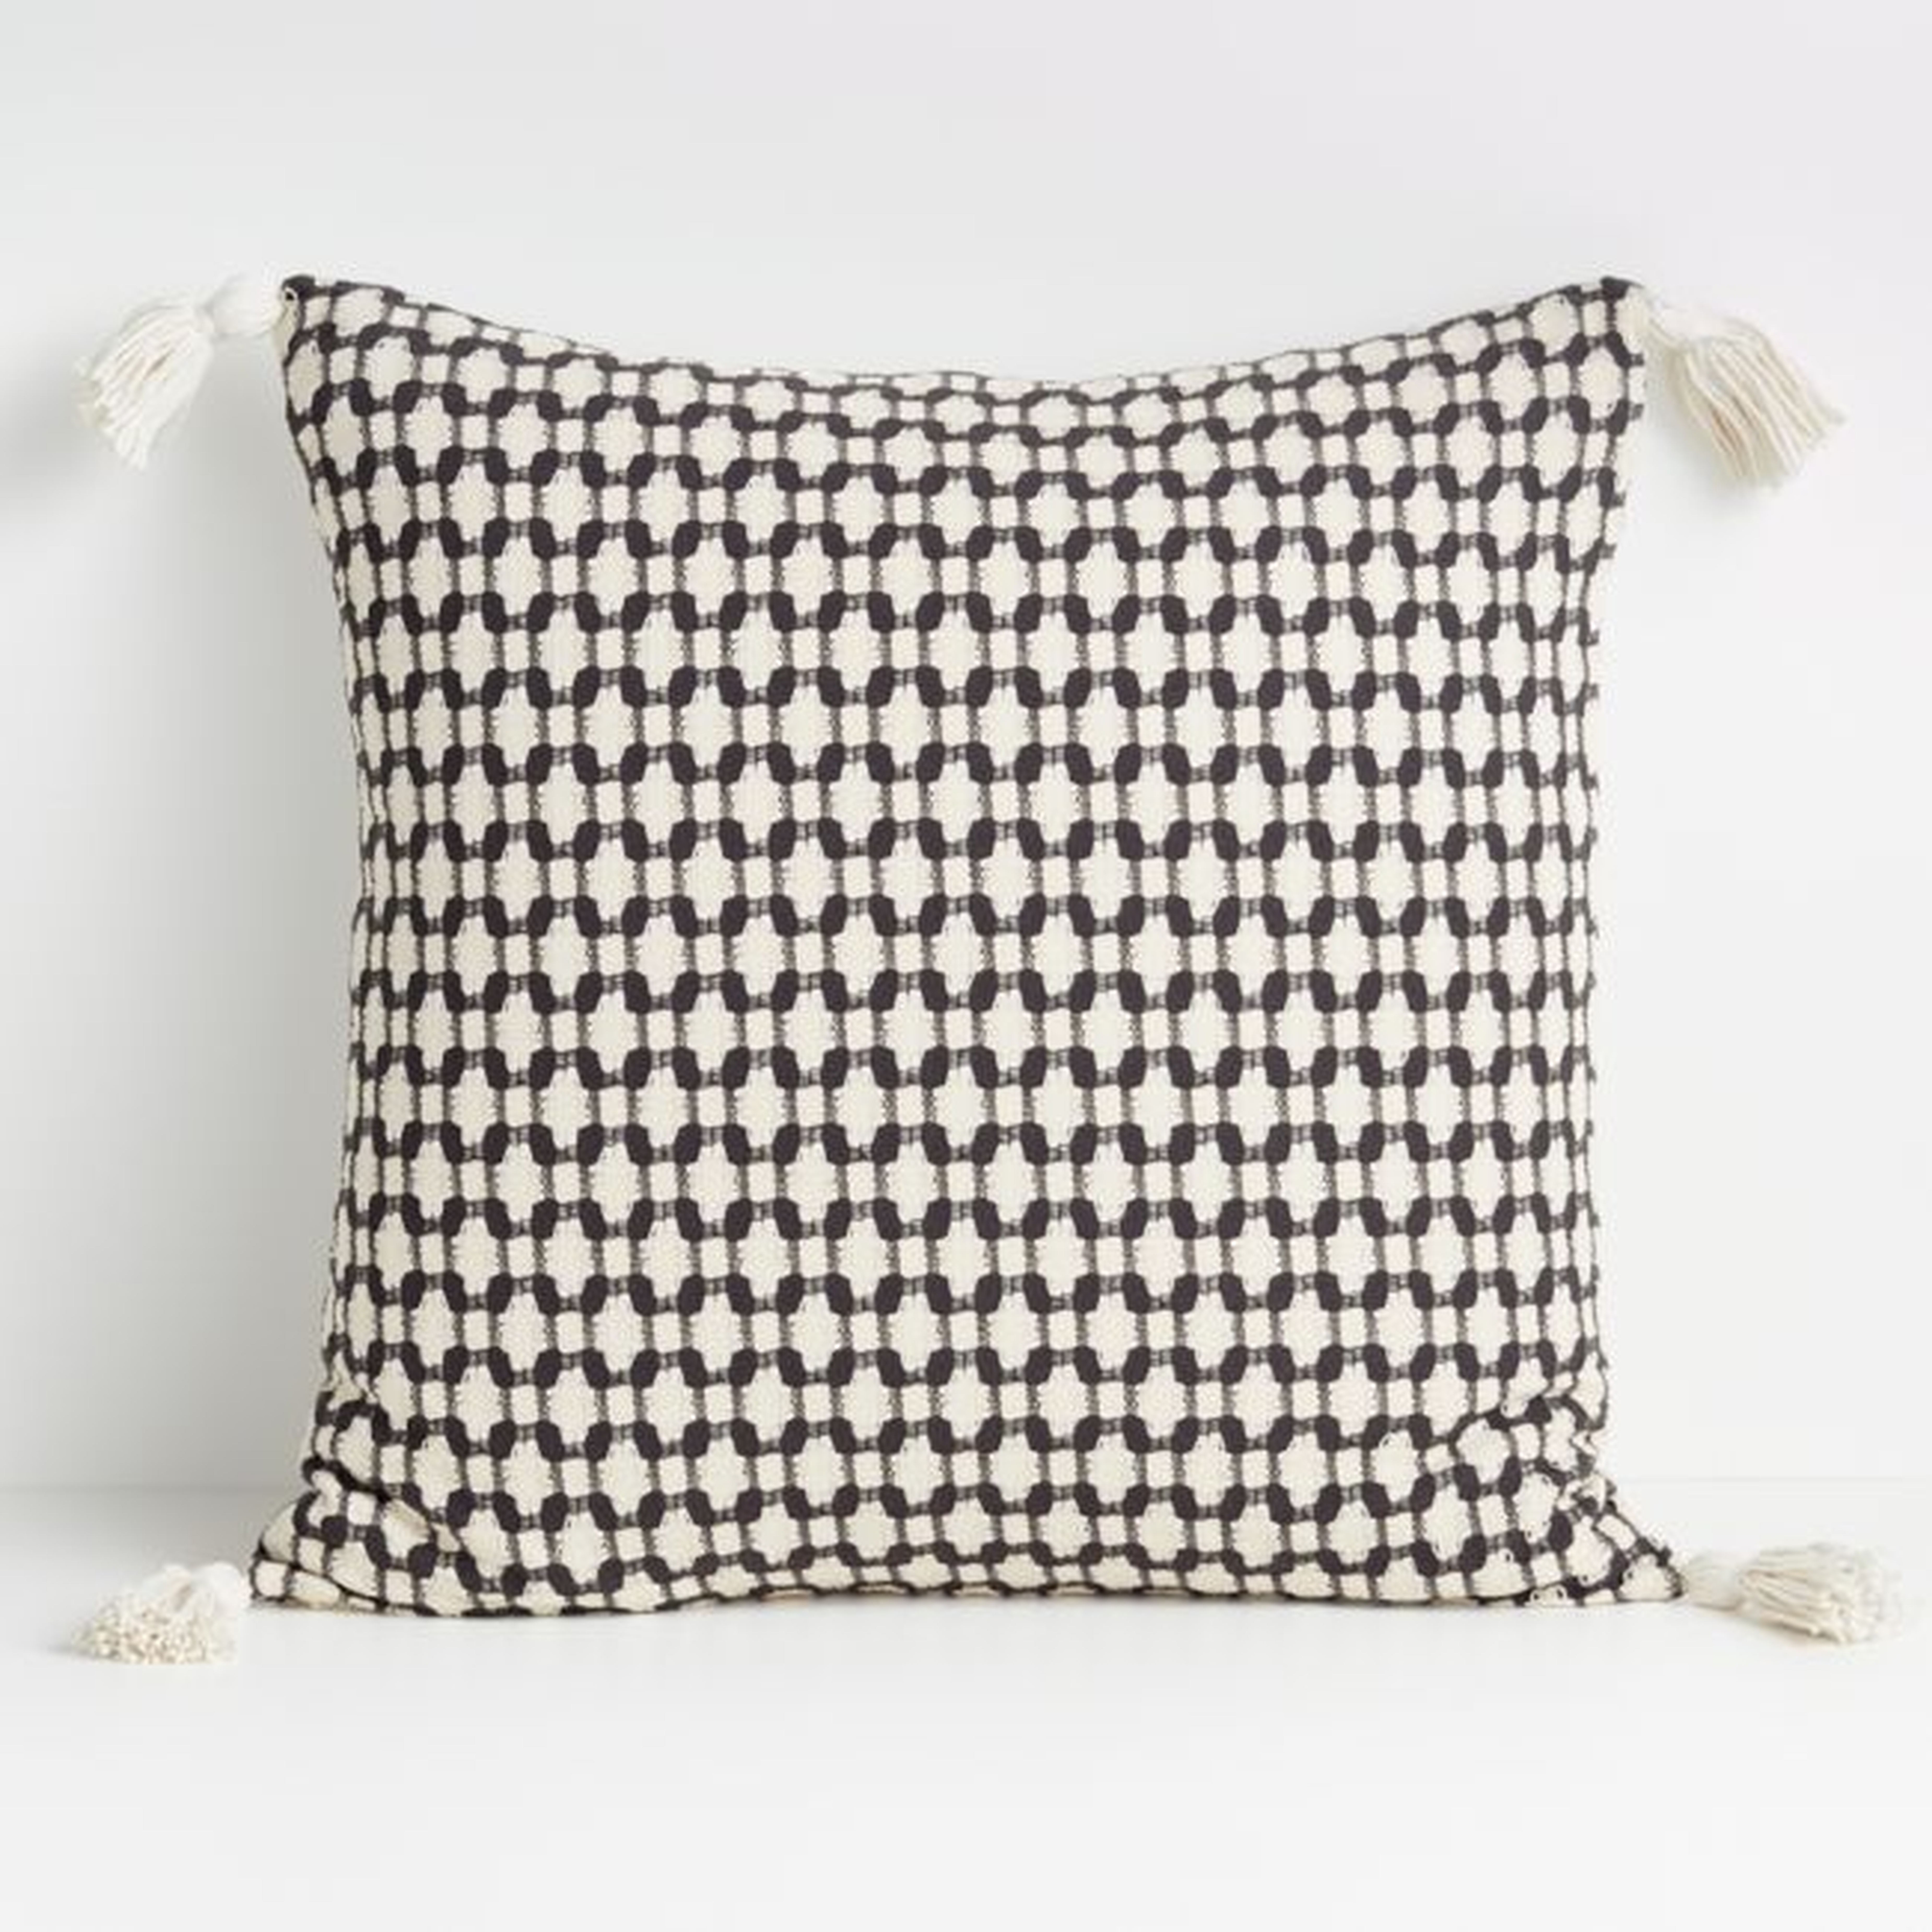 Tahona Textured Pillow Cover, Obsidian, 23" x 23" - Crate and Barrel